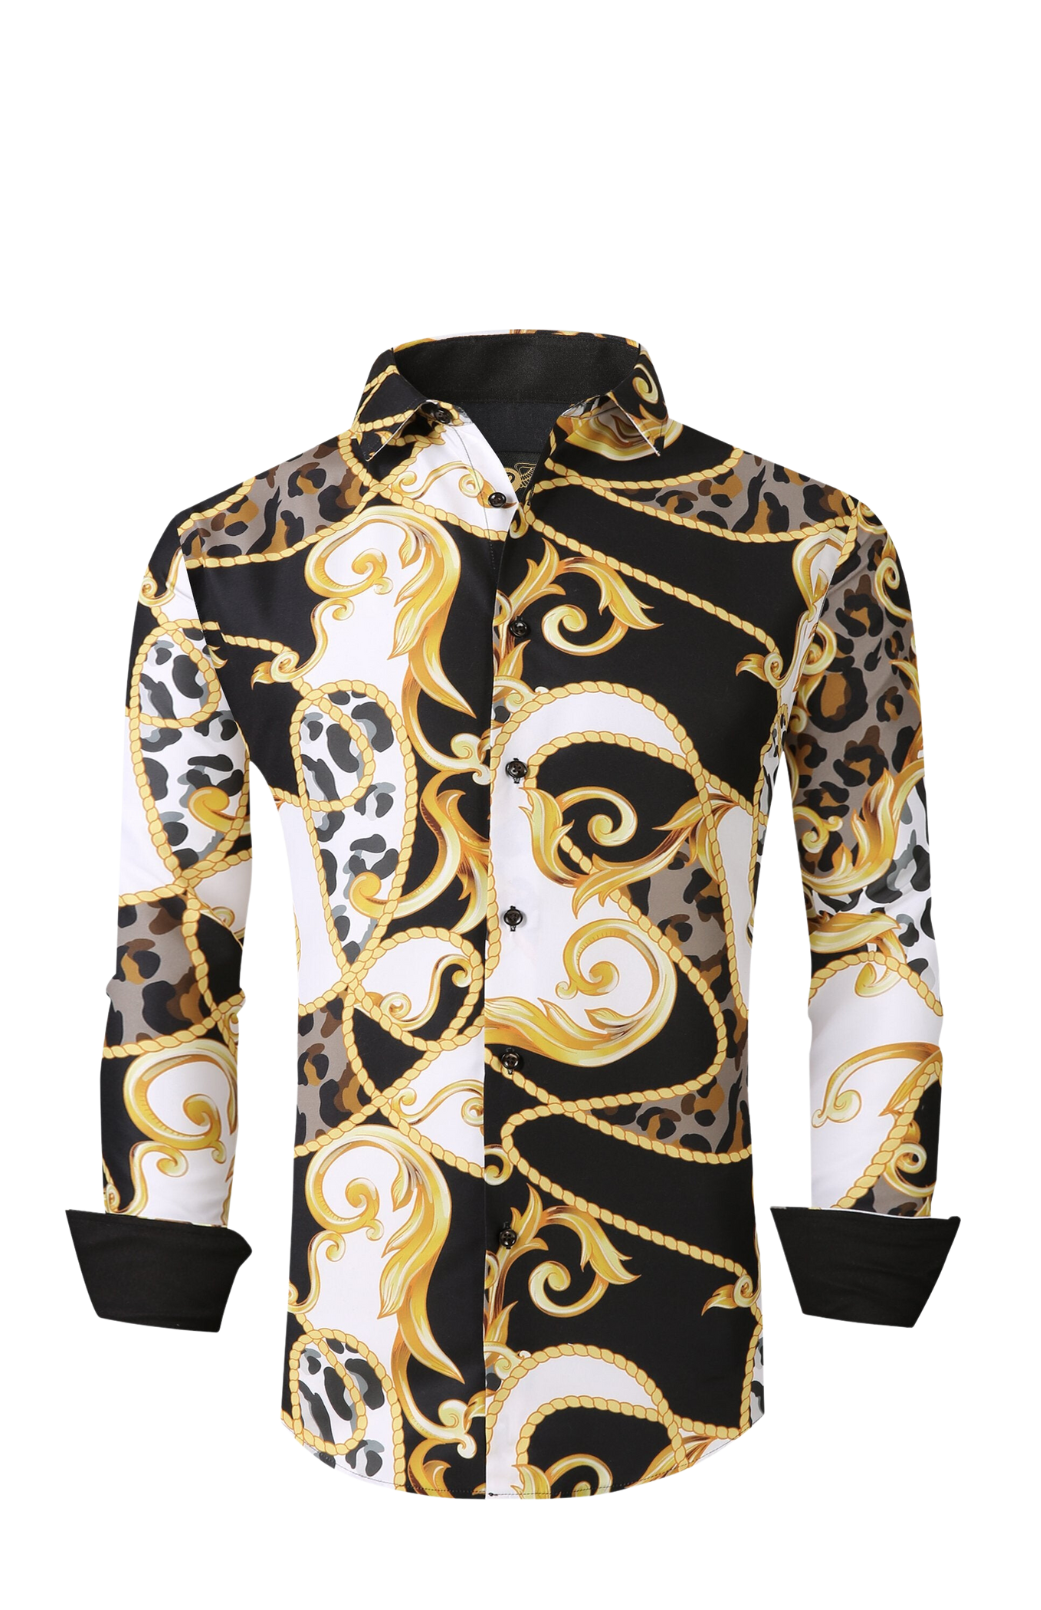 Mens PREMIERE Long Sleeve Button Down Dress Shirt White Black Gold Leaf Abstract